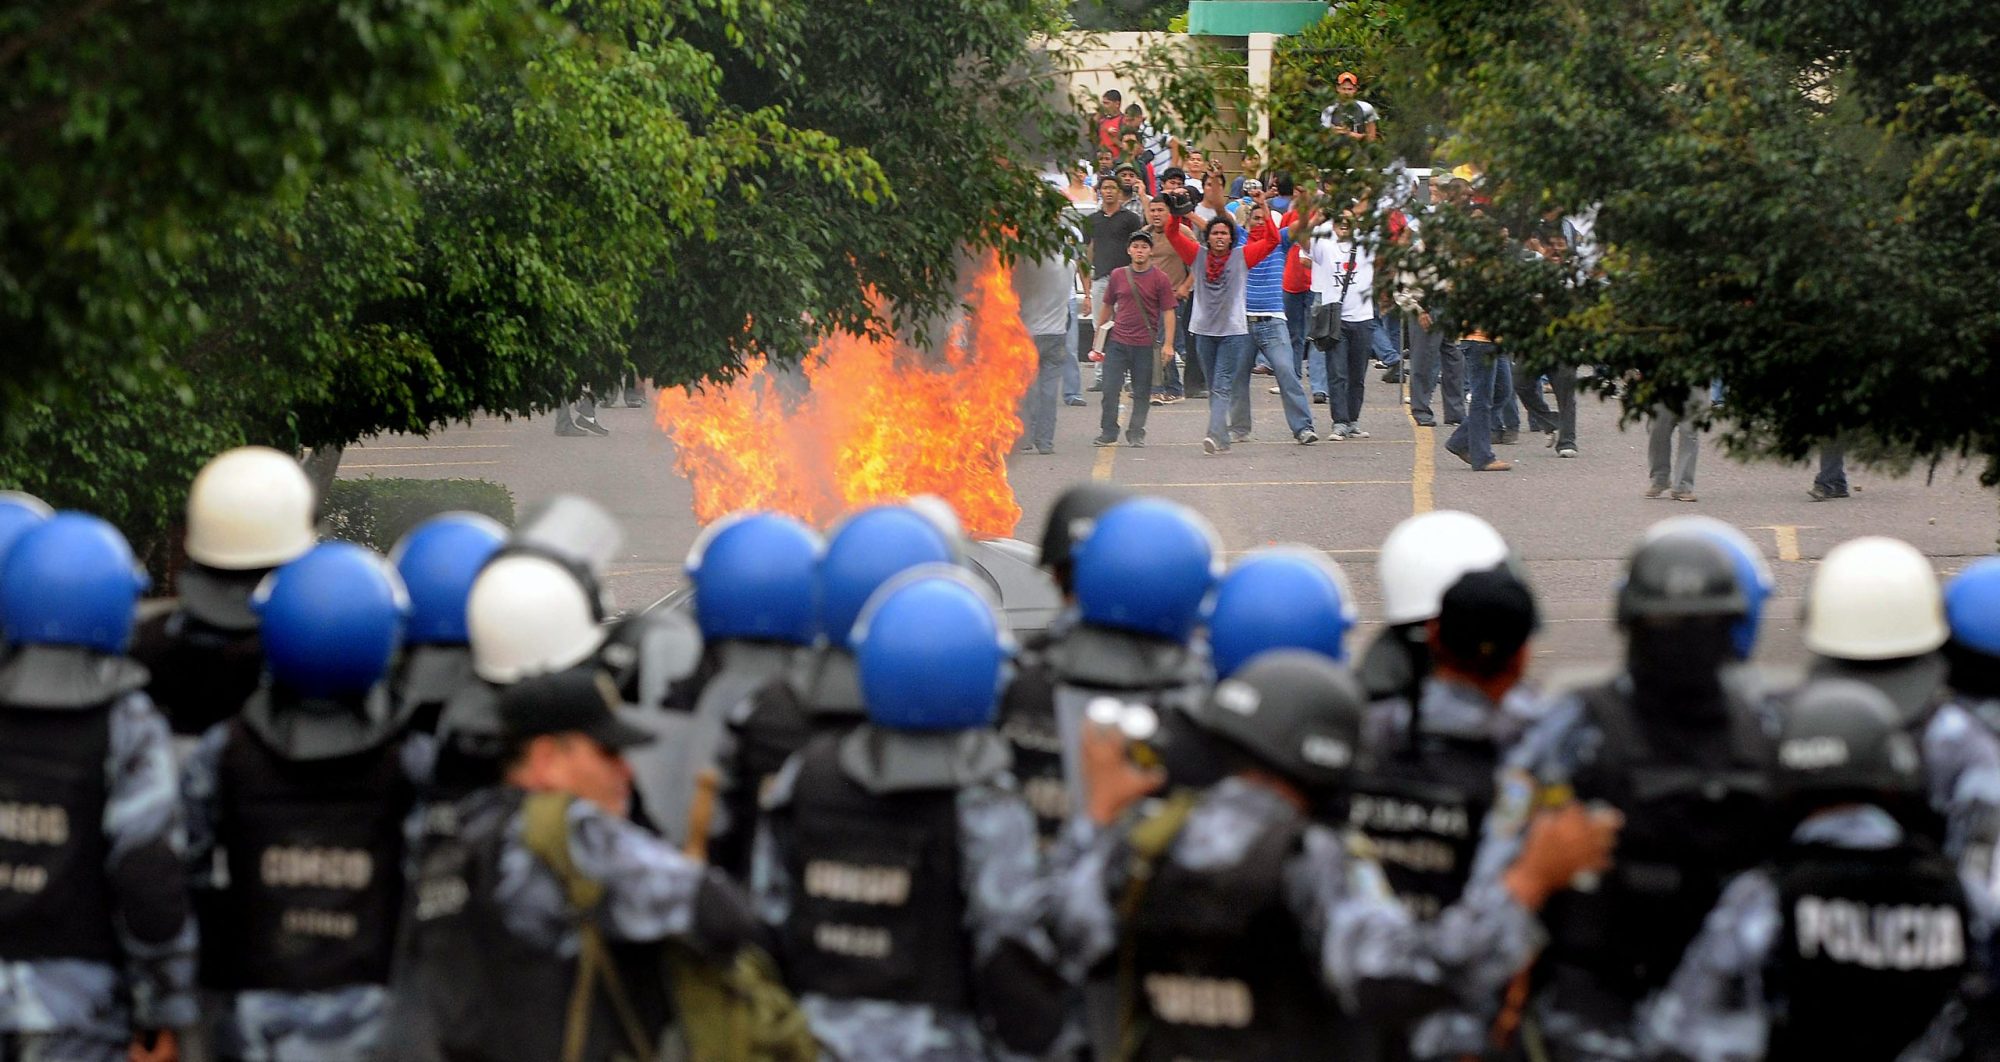 Honduran riot policemen form a barrier during clshes with students from the Universidad Nacional Autonoma de Honduras (UNAH), who demand the restitution of ousted President Manuel Zelaya, on August 5, 2009 in Tegucigalpa. Photo by ORLANDO SIERRA/AFP via Getty Images